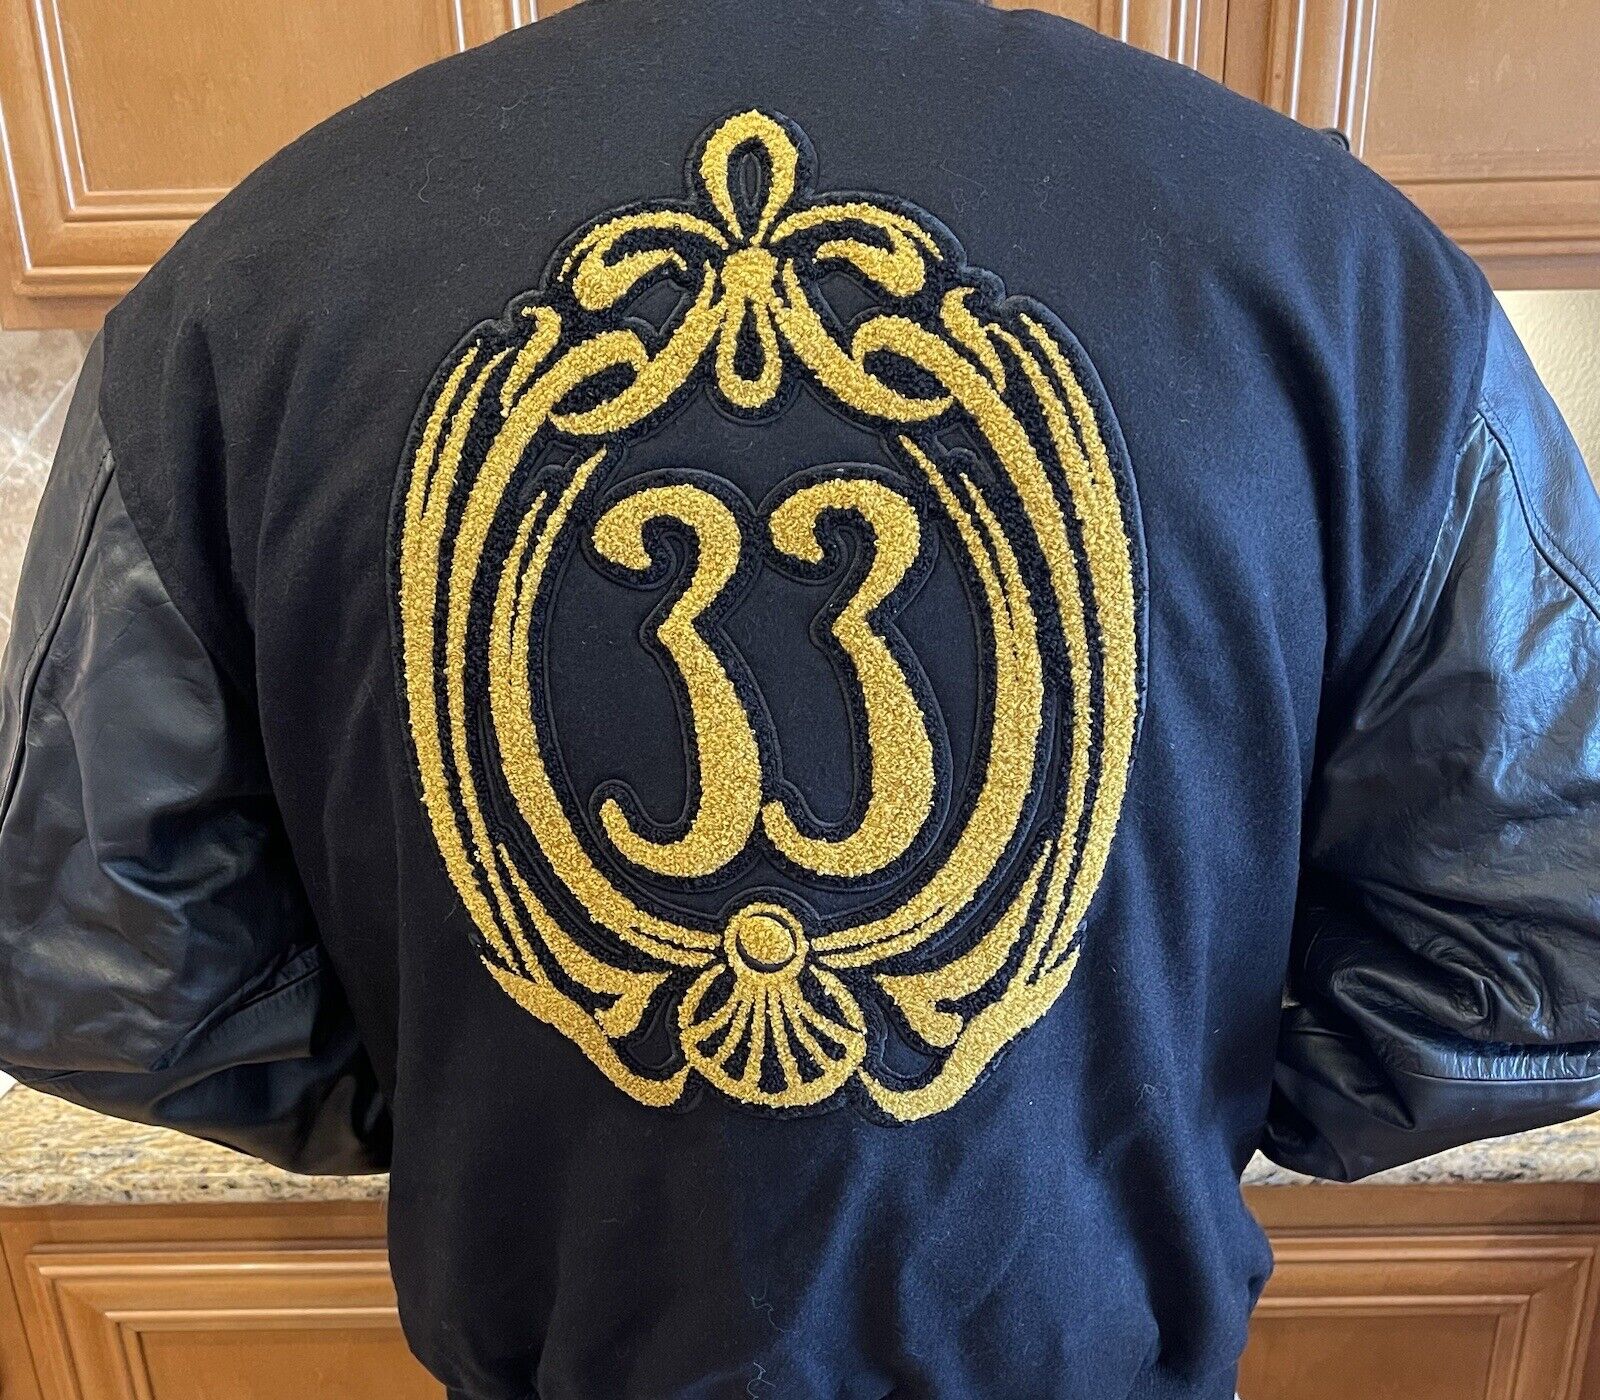 Club 33 Rare Leather Varsity Jacket With Gold Club Logo On Back Sold Out XL